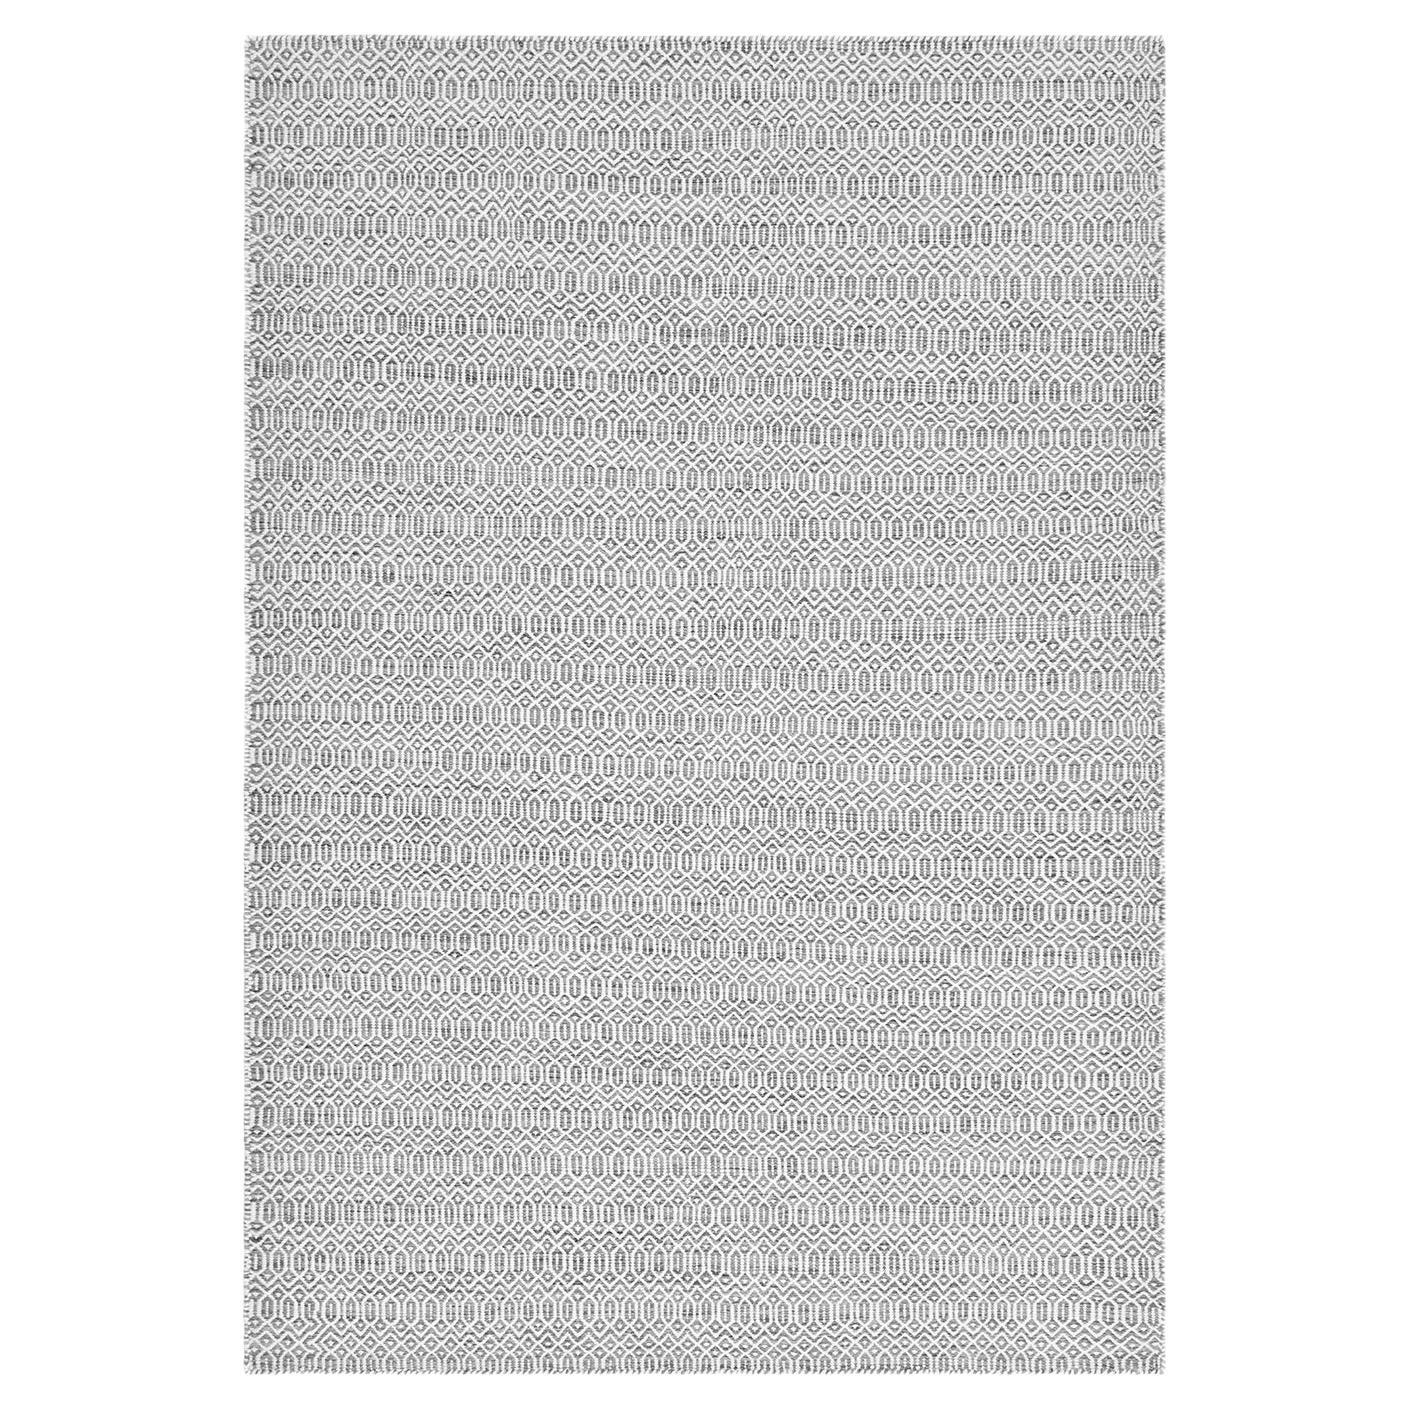 Solo Rugs Chatham Contemporary Geometric Handmade Area Rug Grey For Sale